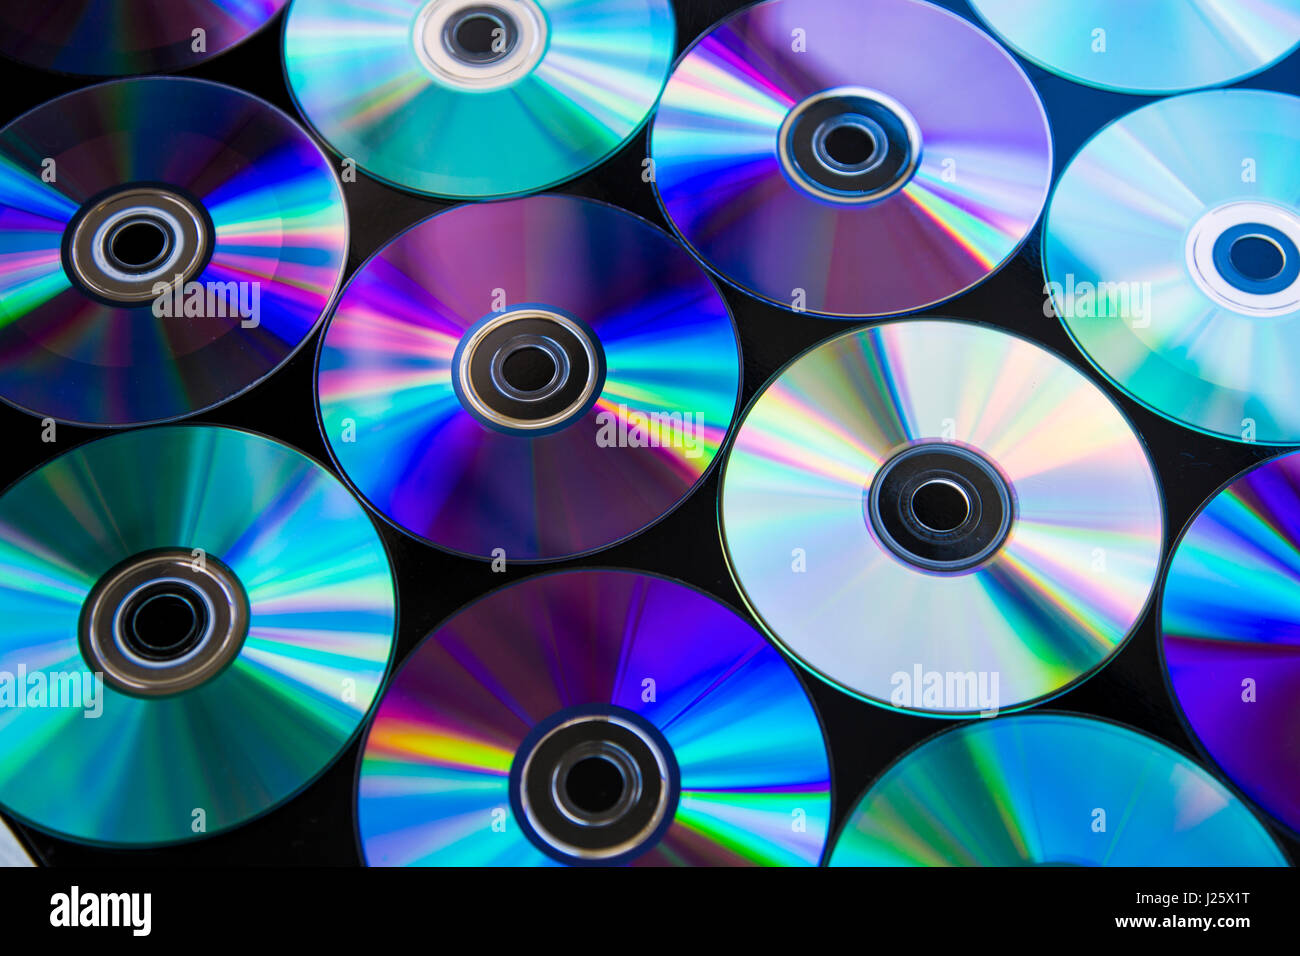 CDs / DVDs arranged in rows background Stock Photo